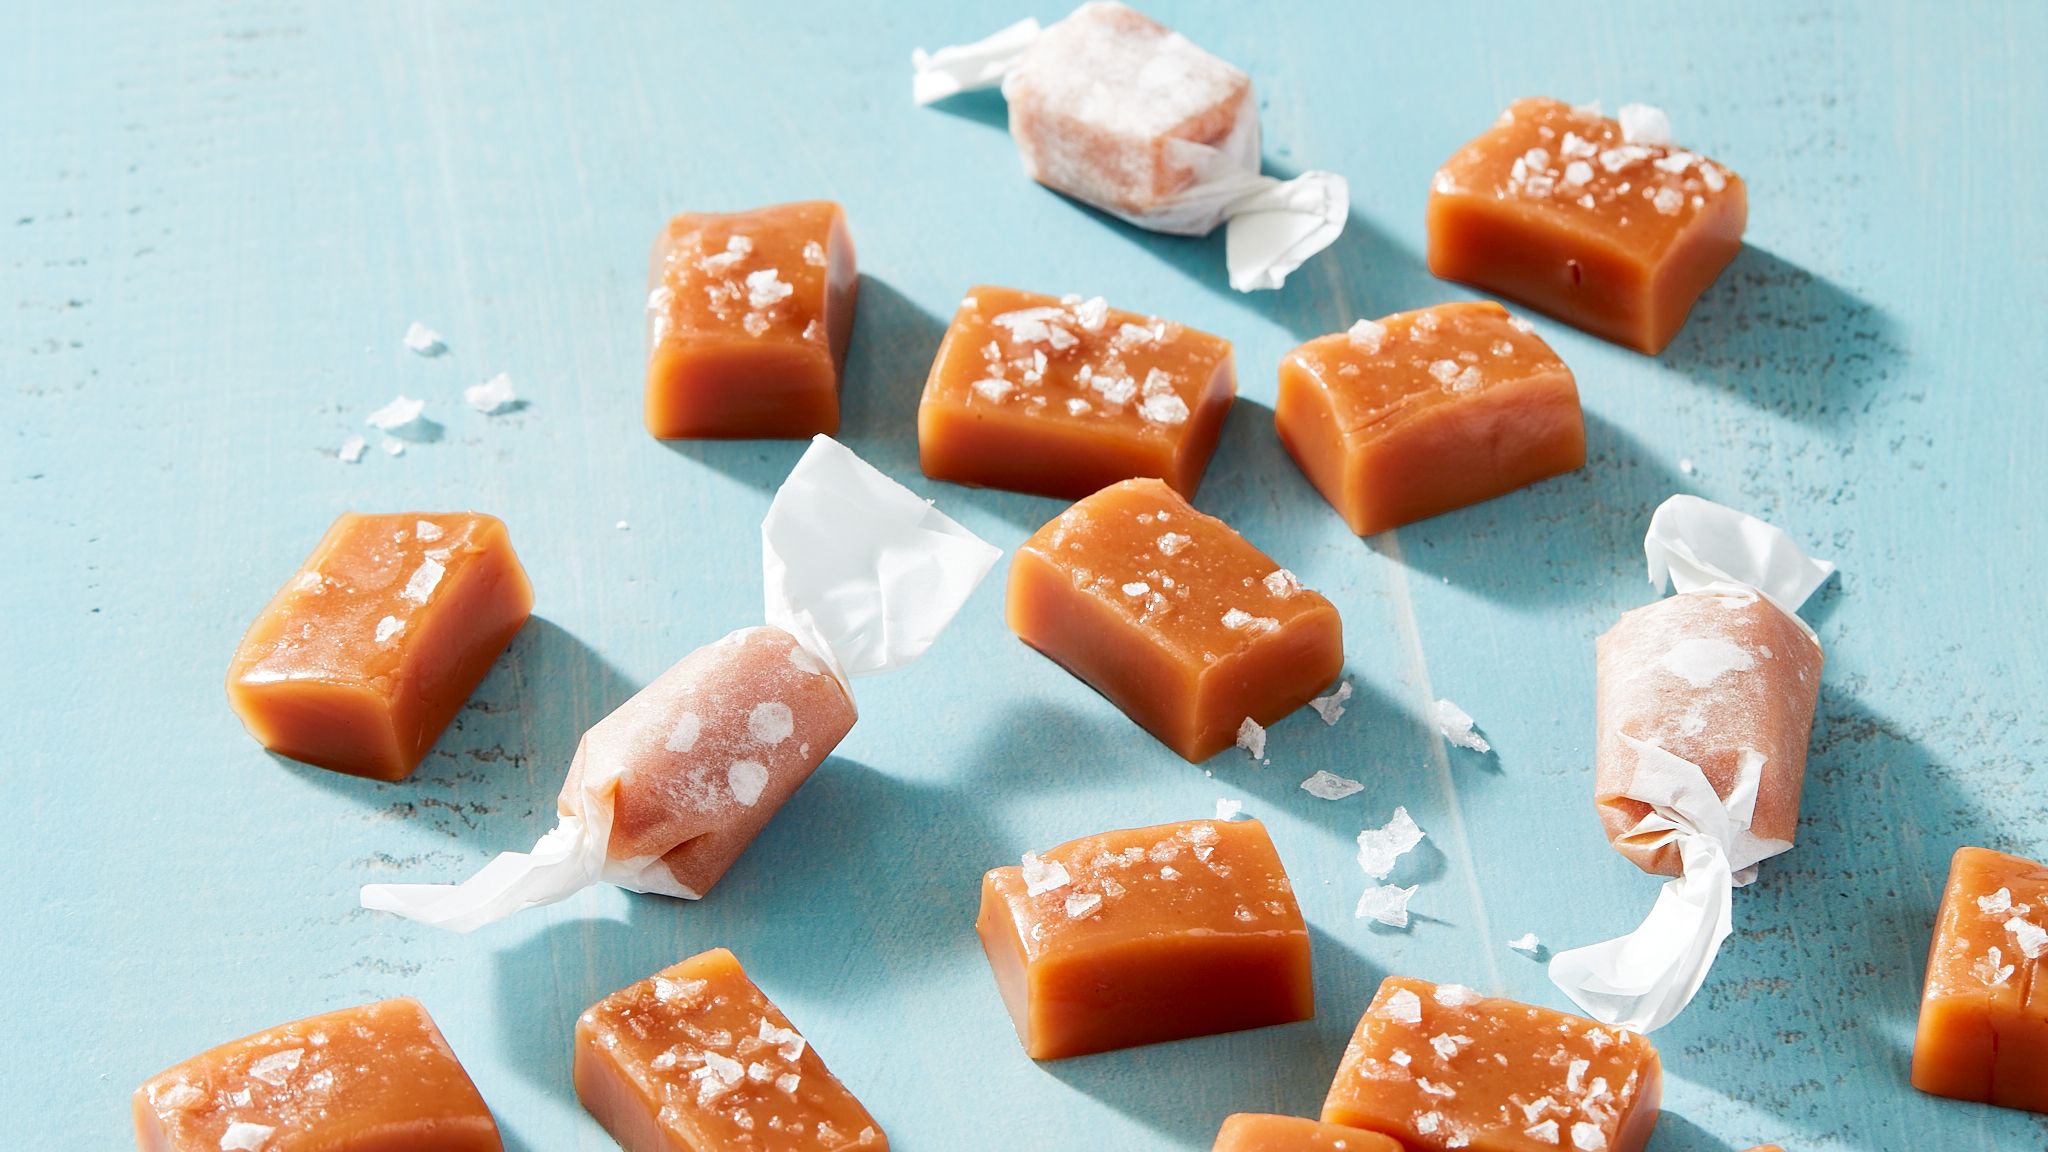 Top 5 reasons why consumers love caramel